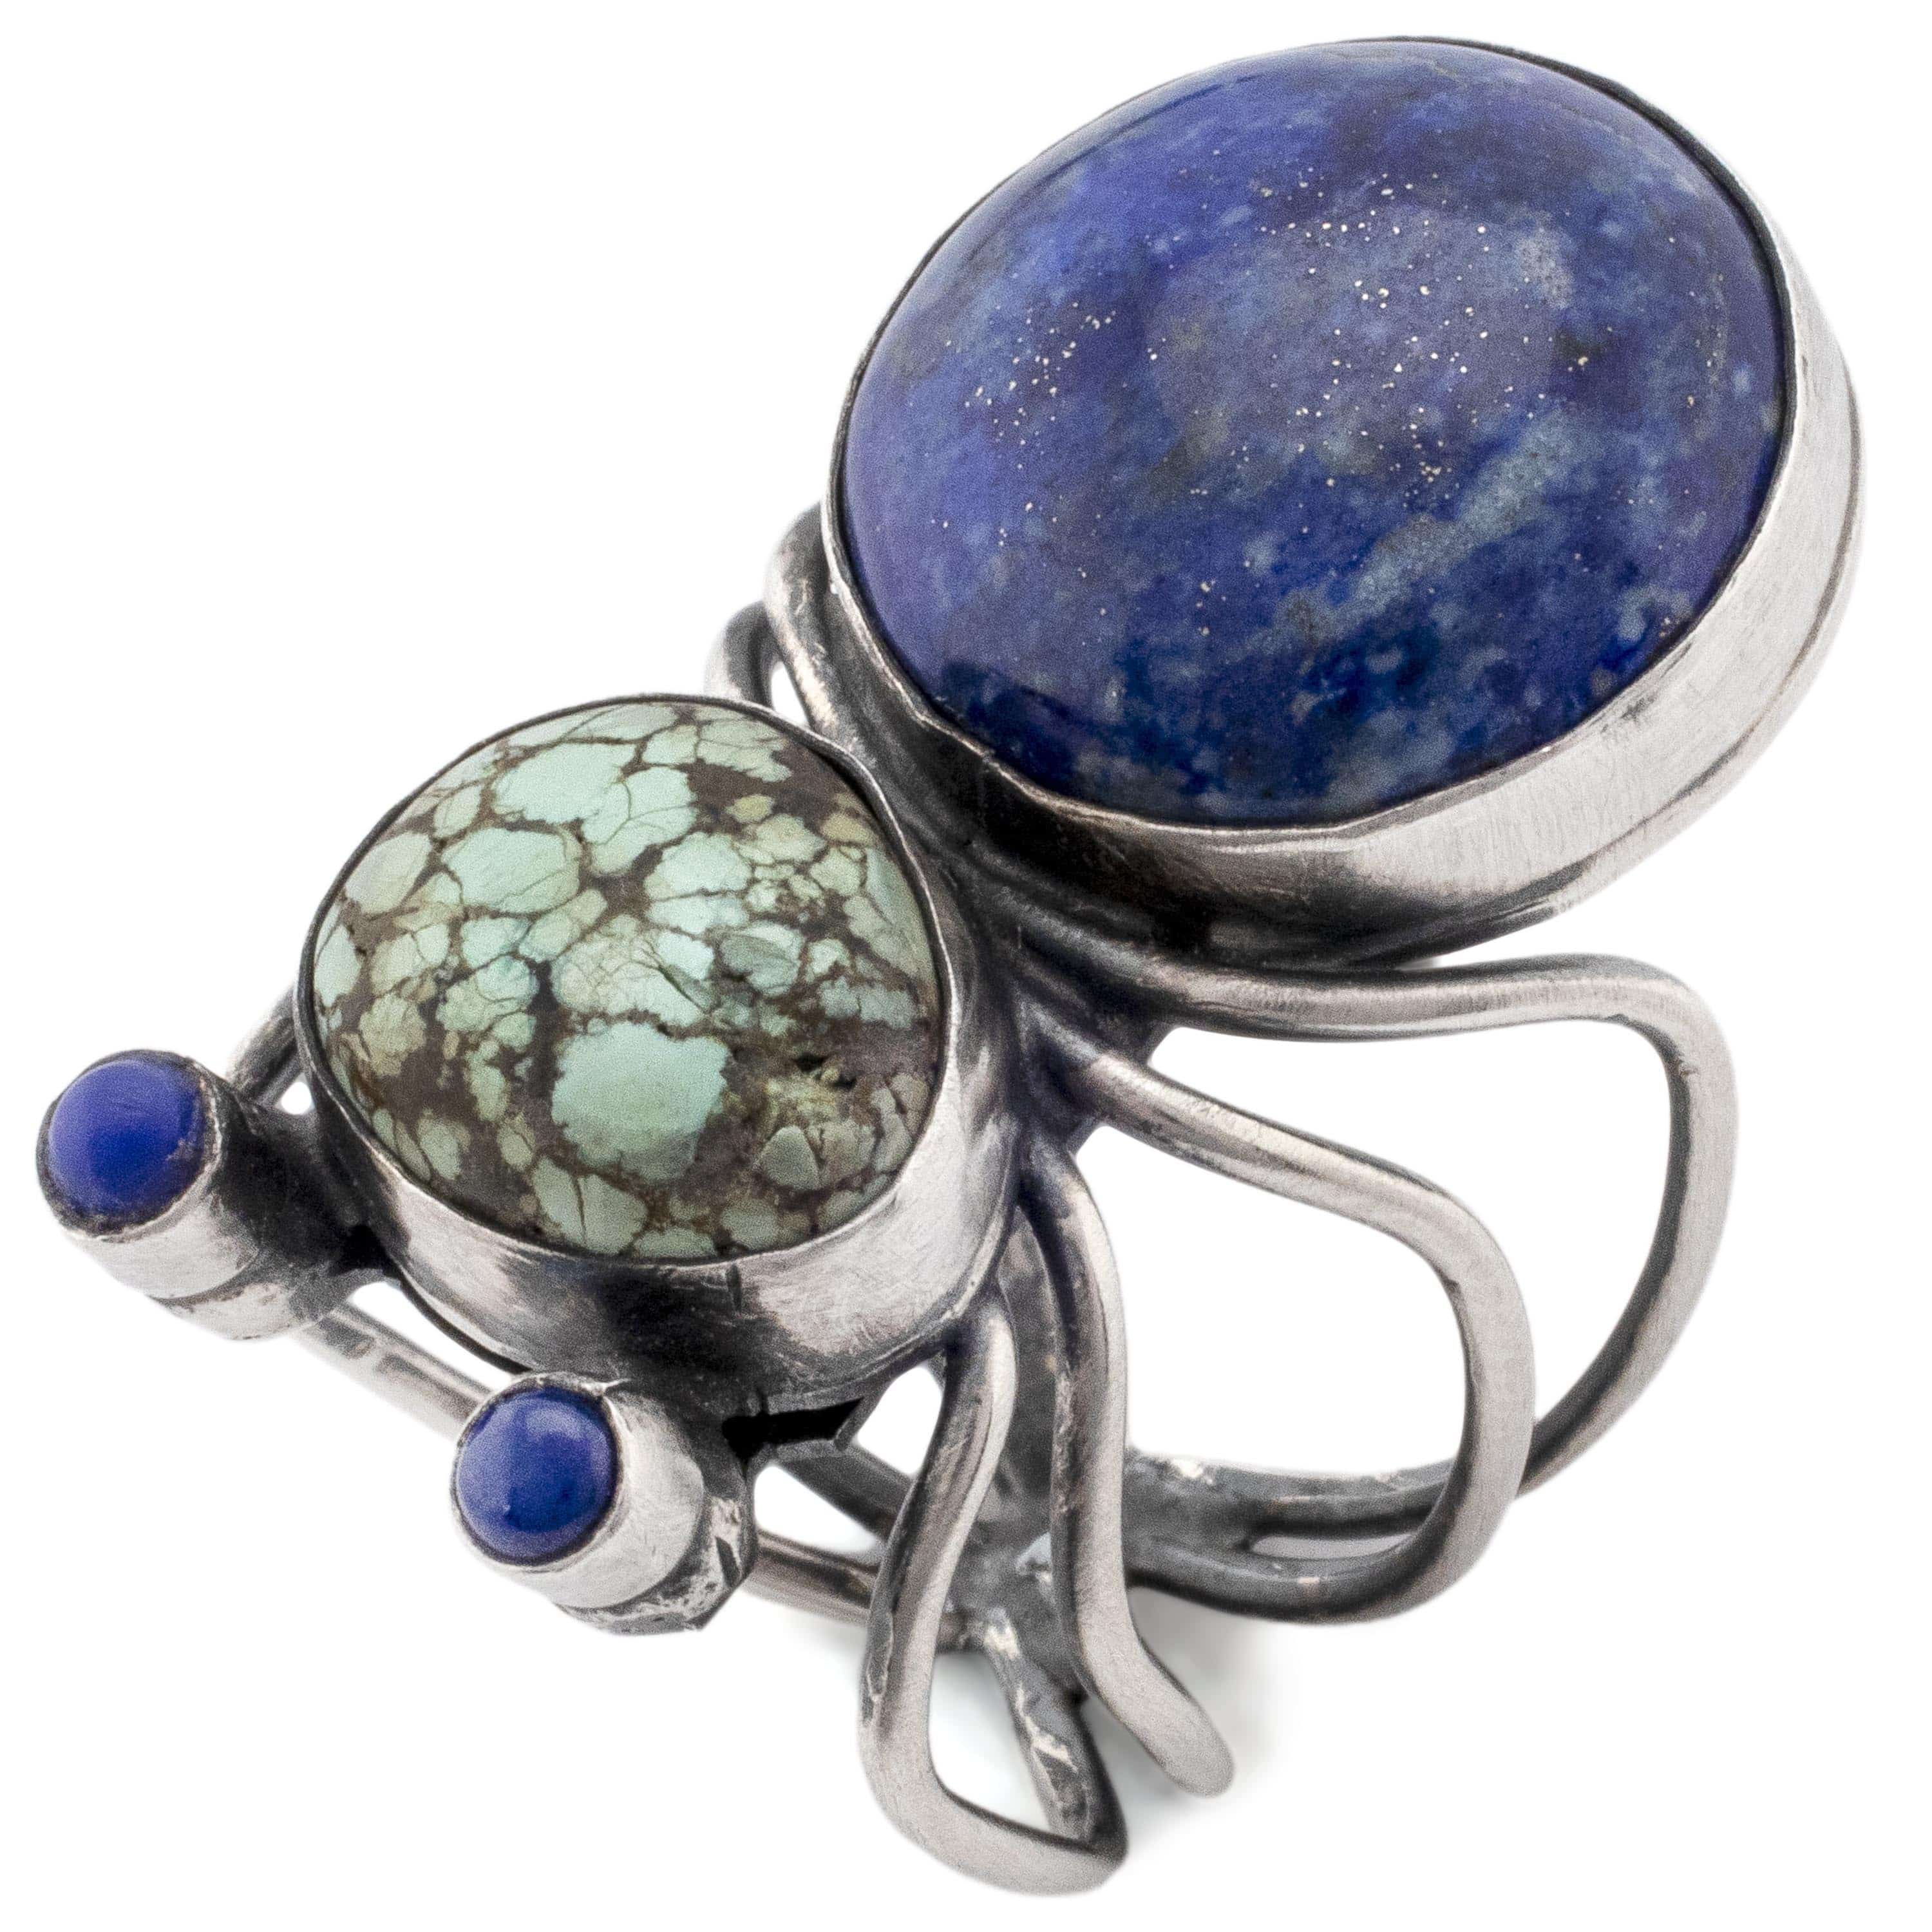 Kalifano Native American Jewelry 8 Herbert Ration Carico Lake and Lapis Spider USA Native American Made 925 Sterling Silver Ring NAR2400.004.8